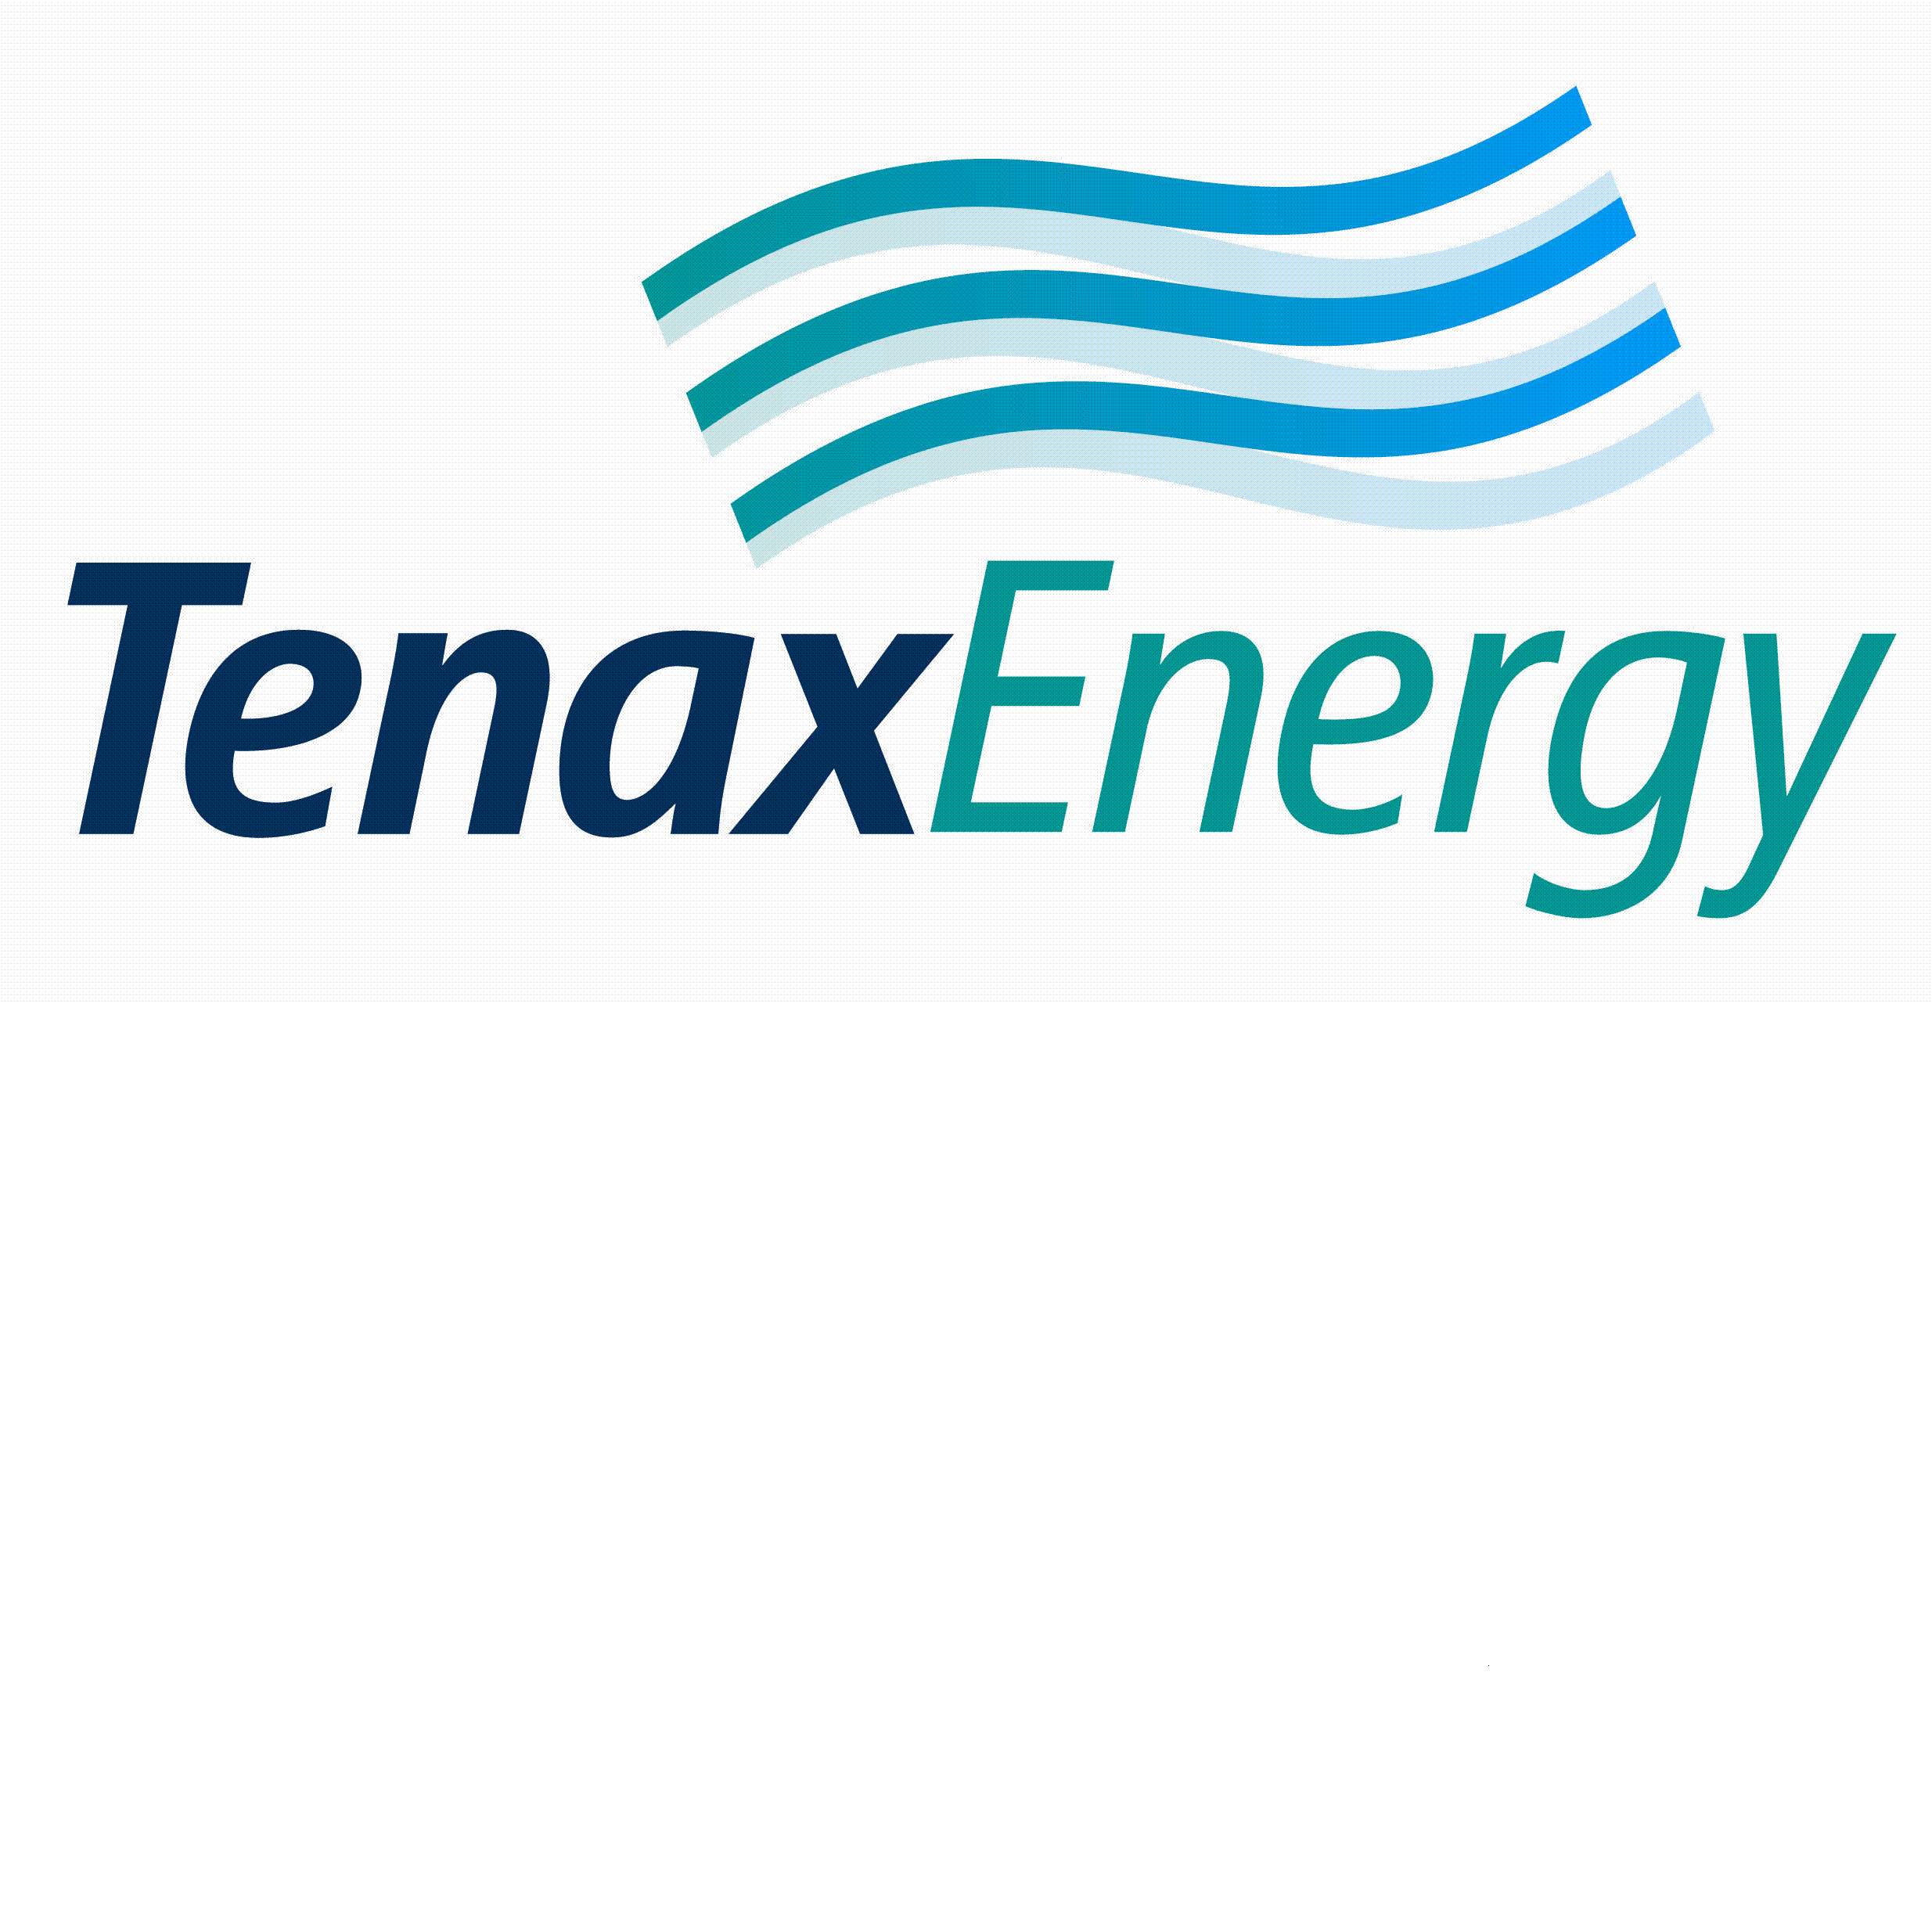 Tenax Energy is a proudly Australian-owned company committed to delivering sustainable tidal energy to Australasian communities.